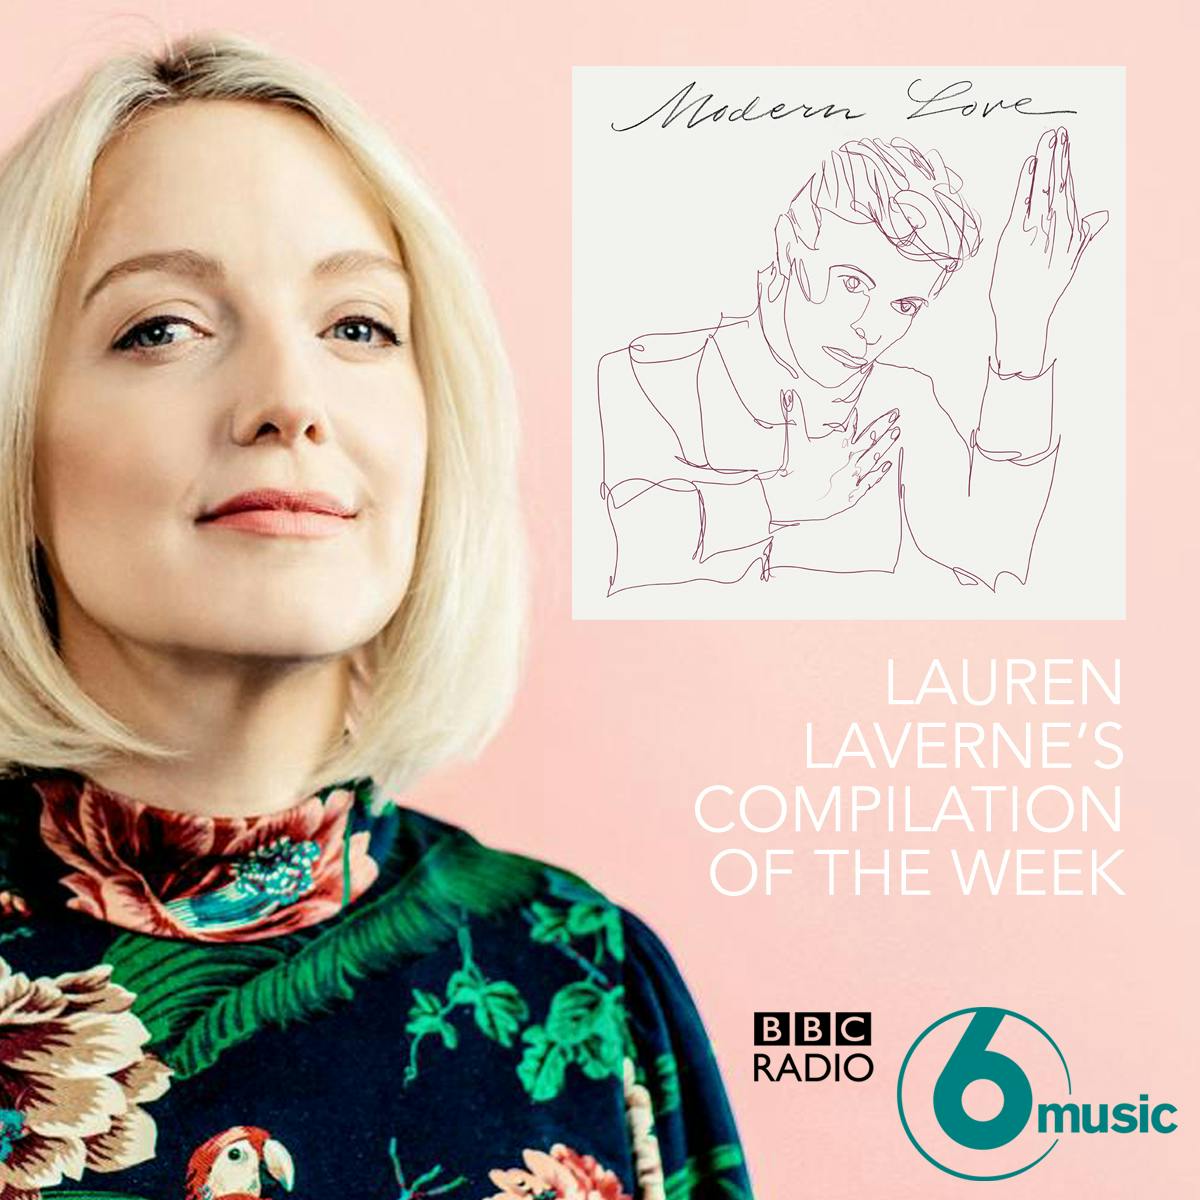 Huge thanks to Lauren Laverne for choosing our Bowie tribute 'Modern Love' as her Compilation of the Week on BBC 6 Music!